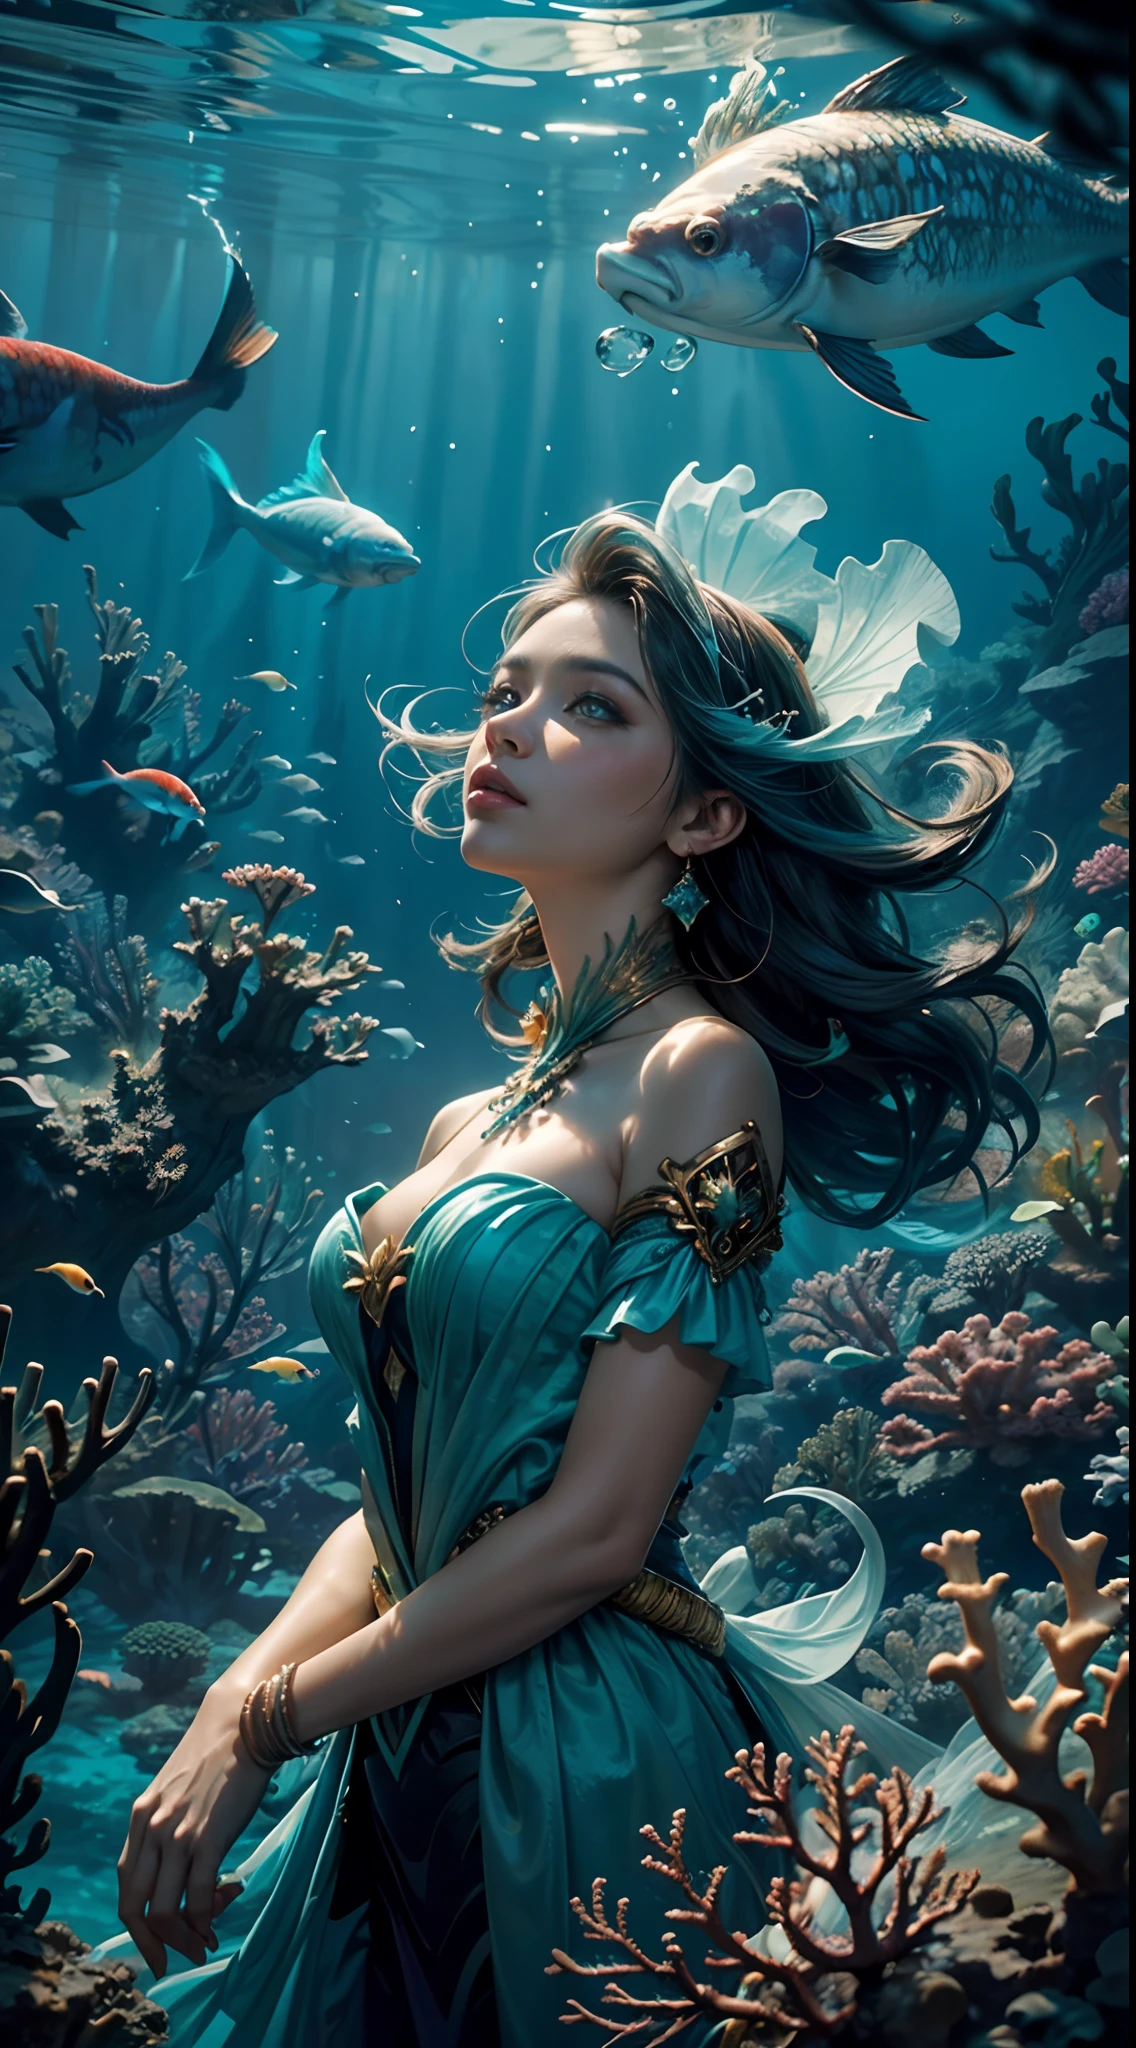 modelshoot style, (extremely detailed CG unit 8k wallpaper), A chaotic storm of intricate liquid smoke in the head, Stylized abstract portrait of pretty, skin wet,Koi，Koi bonito |，Bandas Koi,carp，Strangely shaped corals，Ocean floor，Beautiful coral reef in the background，rockery,Marine life，author：Petros Afshar, ross tran, Tom Baleia, peter mohrbacher, art germ, vidro quebrado, ((bubbly underwater scenery)) The octane rendering of radiant light is highly detailed